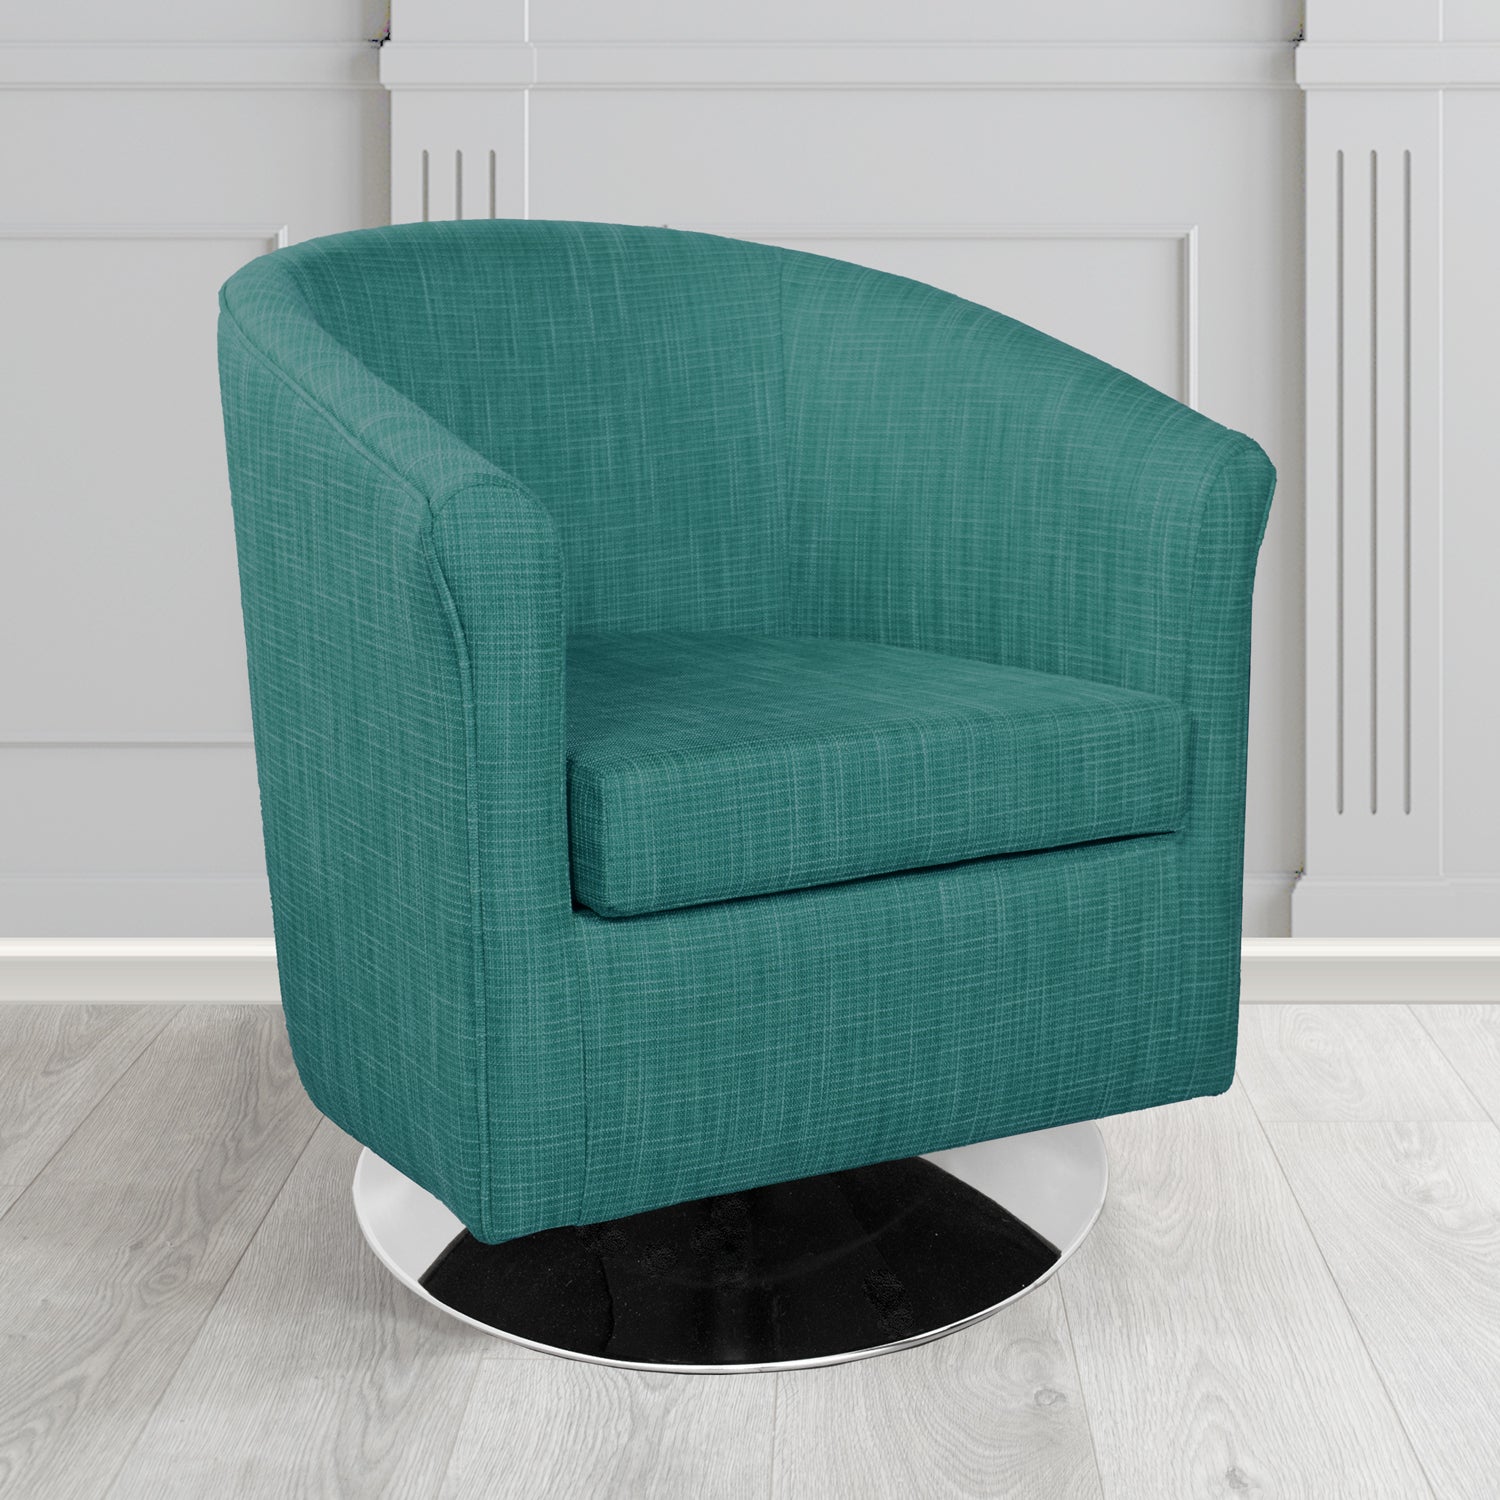 Tuscany Ravel Kingfisher Contract Crib 5 Fabric Swivel Tub Chair - Antimicrobial & Water-Resistant - The Tub Chair Shop